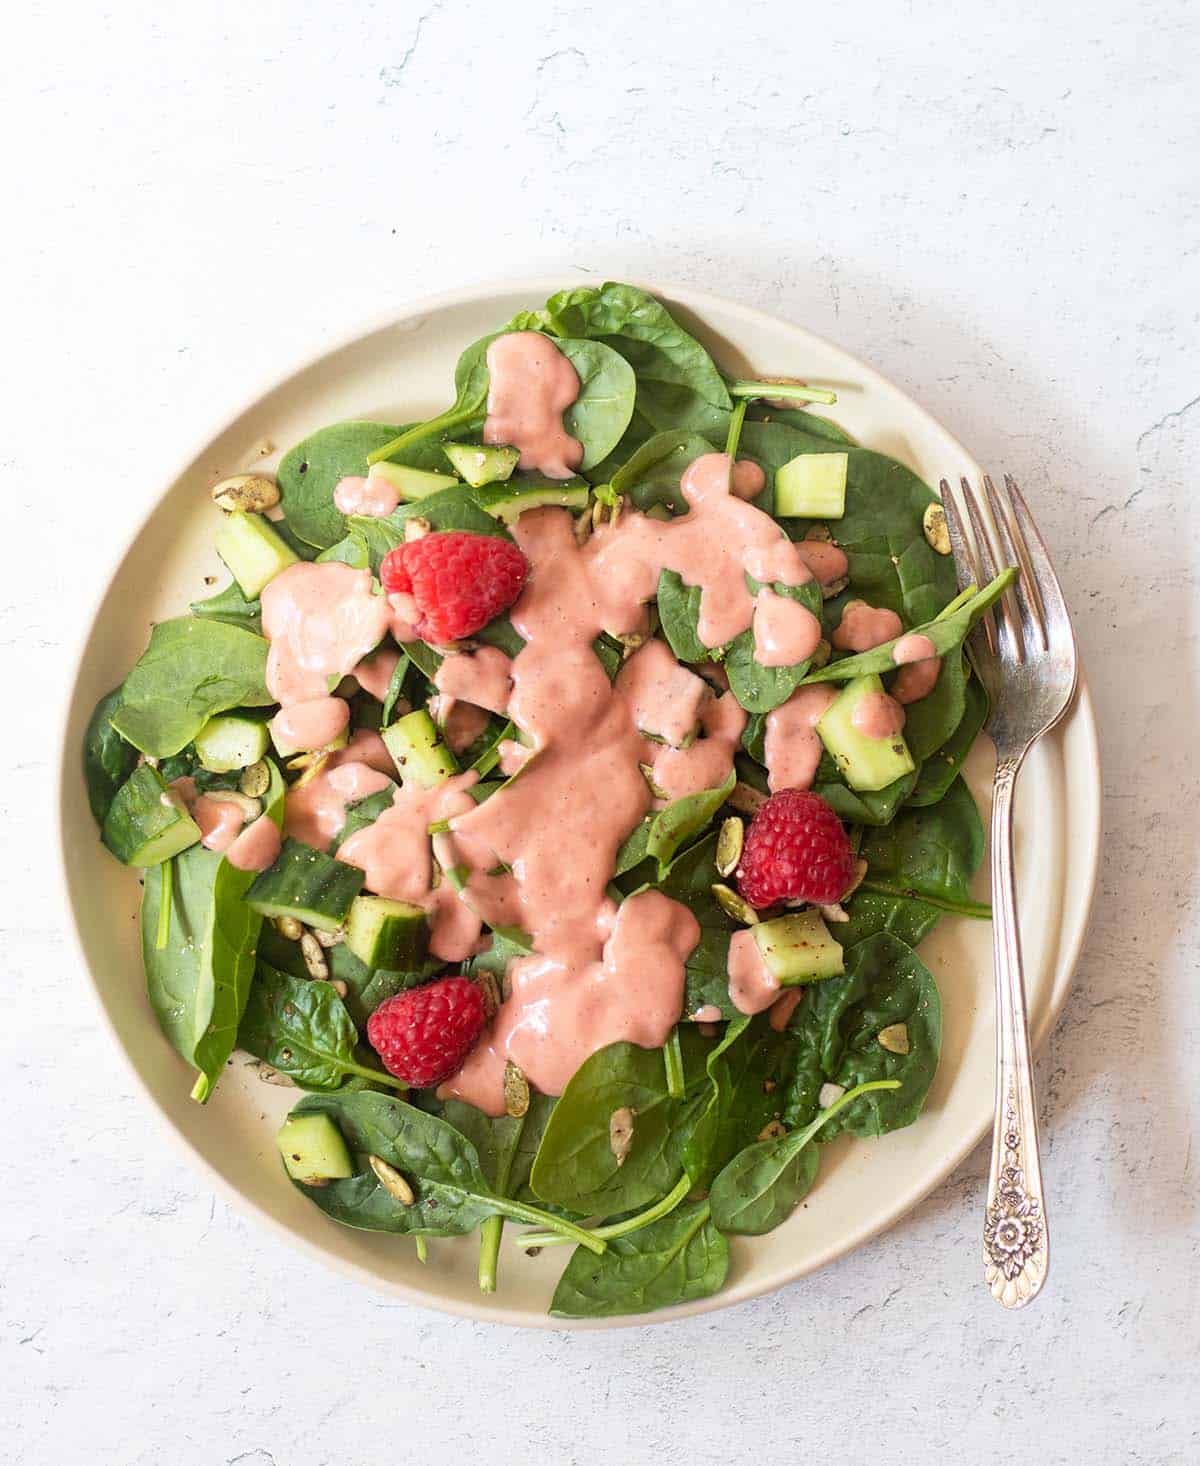 Raspberry Vinaigrette drizzled on top of a spinach salad with cucumbers and fresh raspberries. It's served on a beige salad plate with a silver fork.